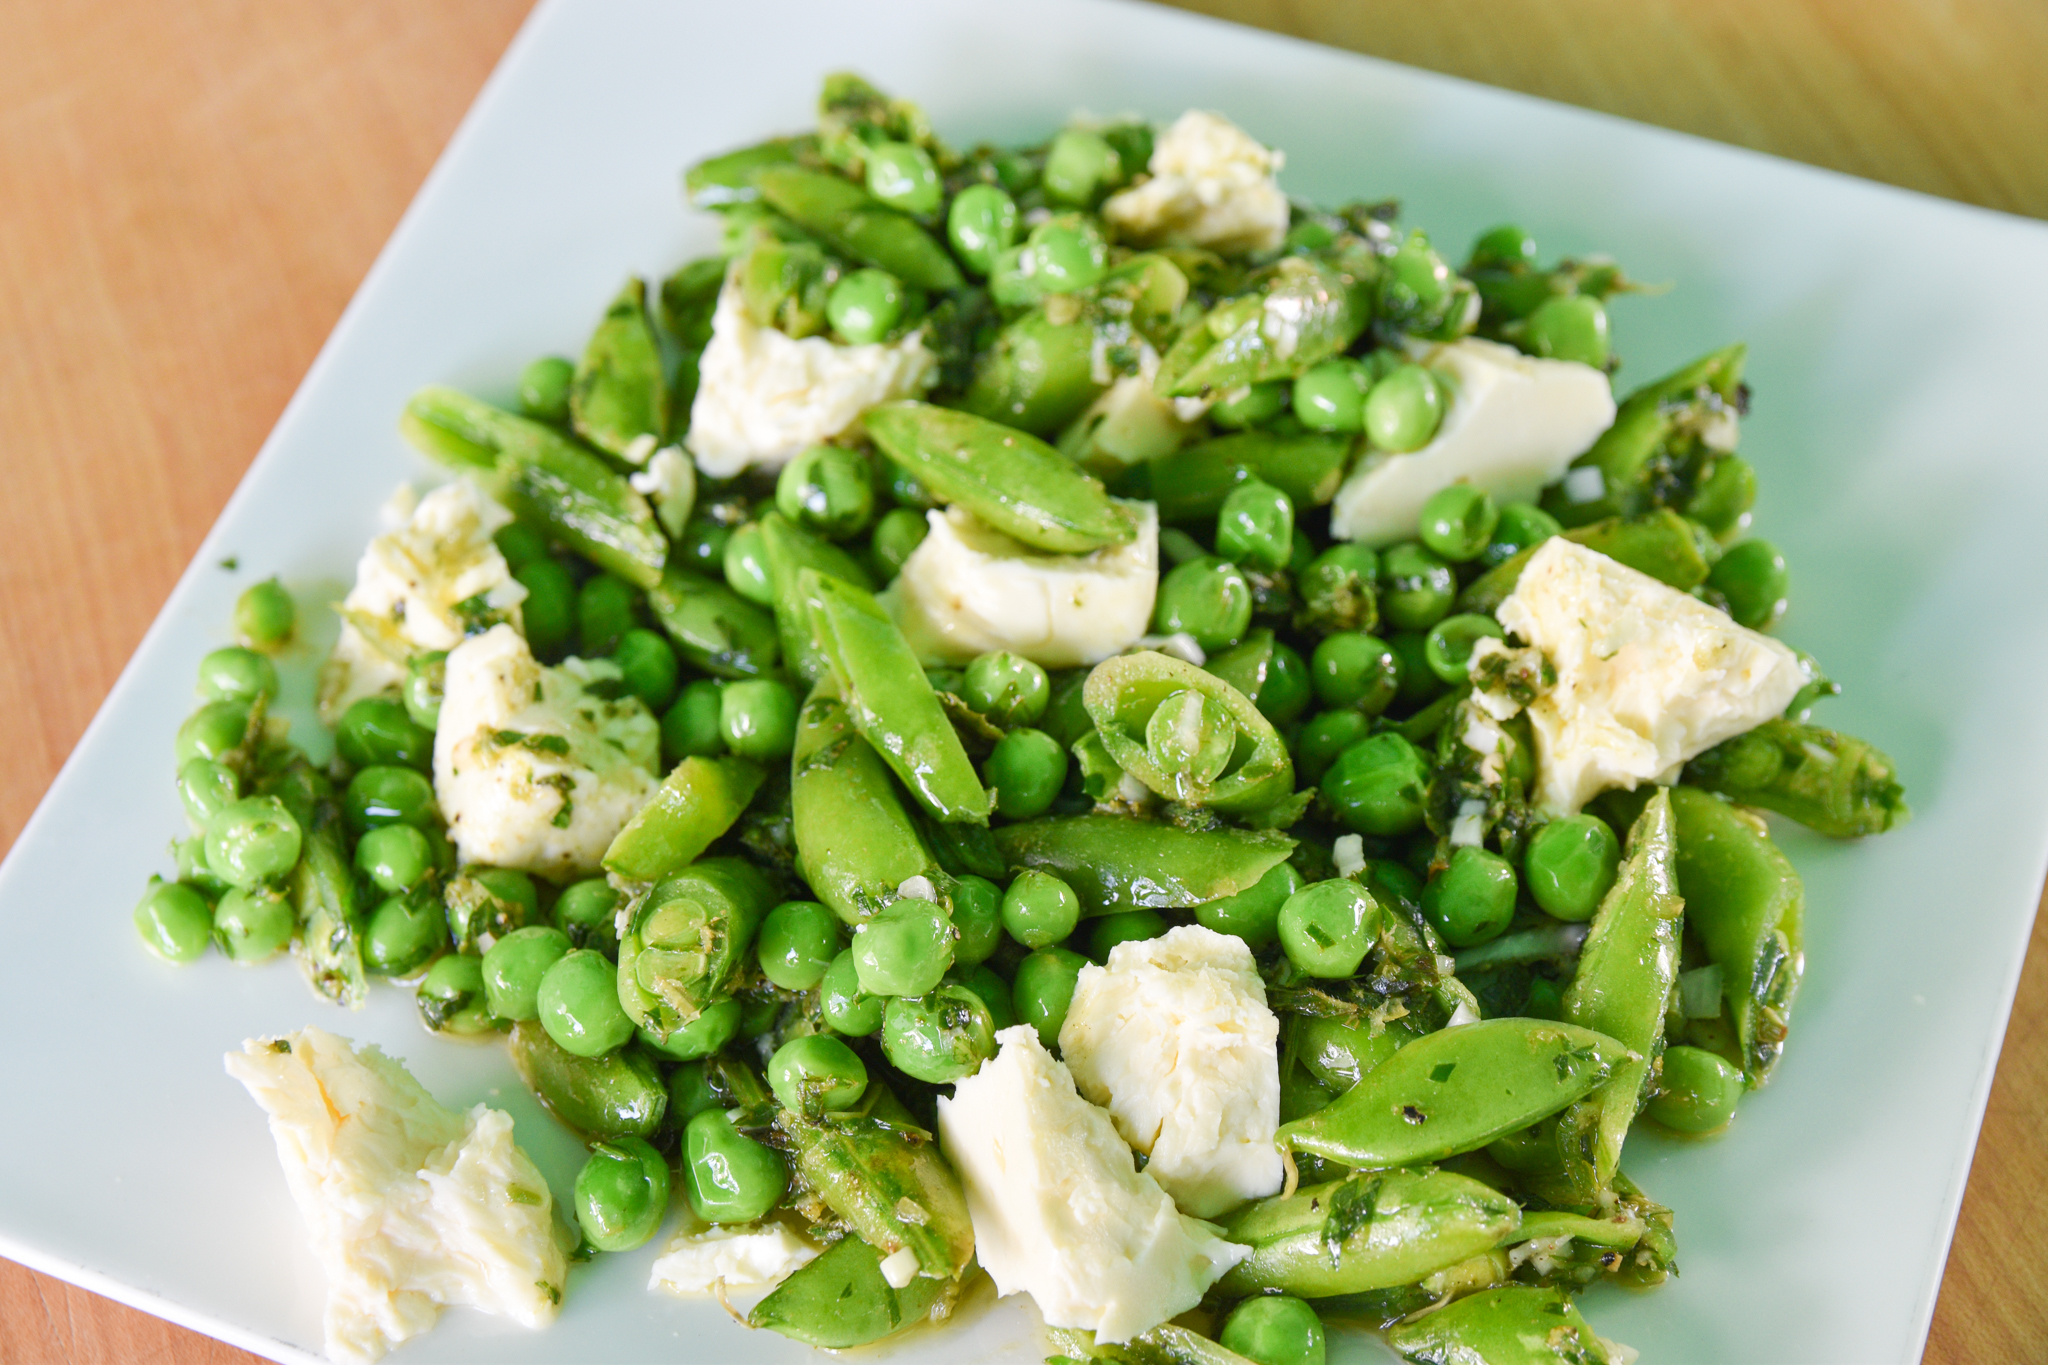 https://foodwise.org/wp-content/uploads/2022/06/Peas_with_feta_and_zhoug_baraghani.jpg